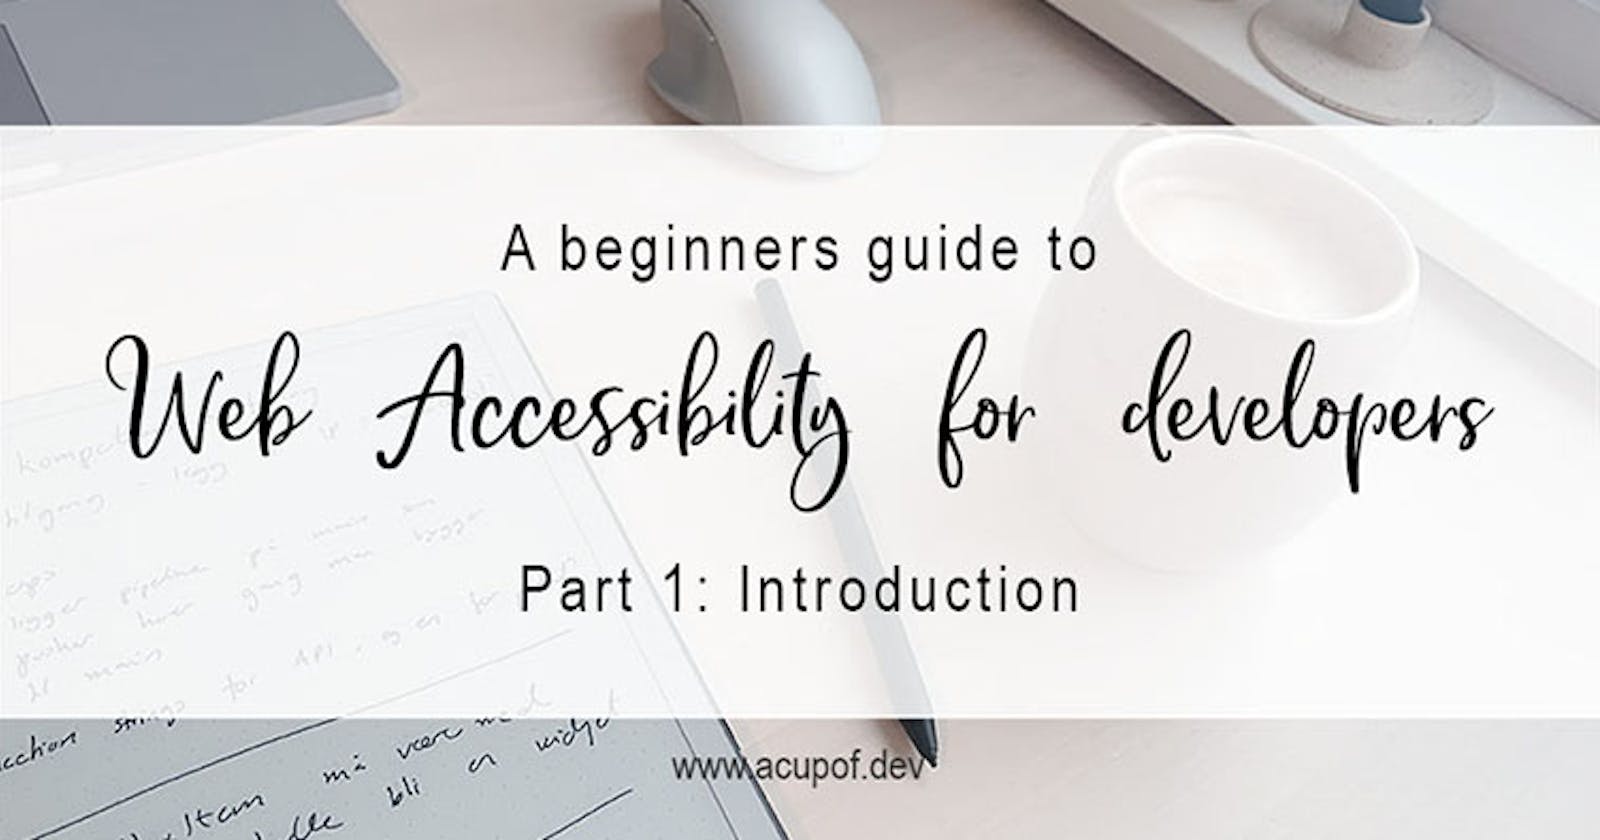 A beginners guide to Web Accessibility for developers: Part 1 – introduction